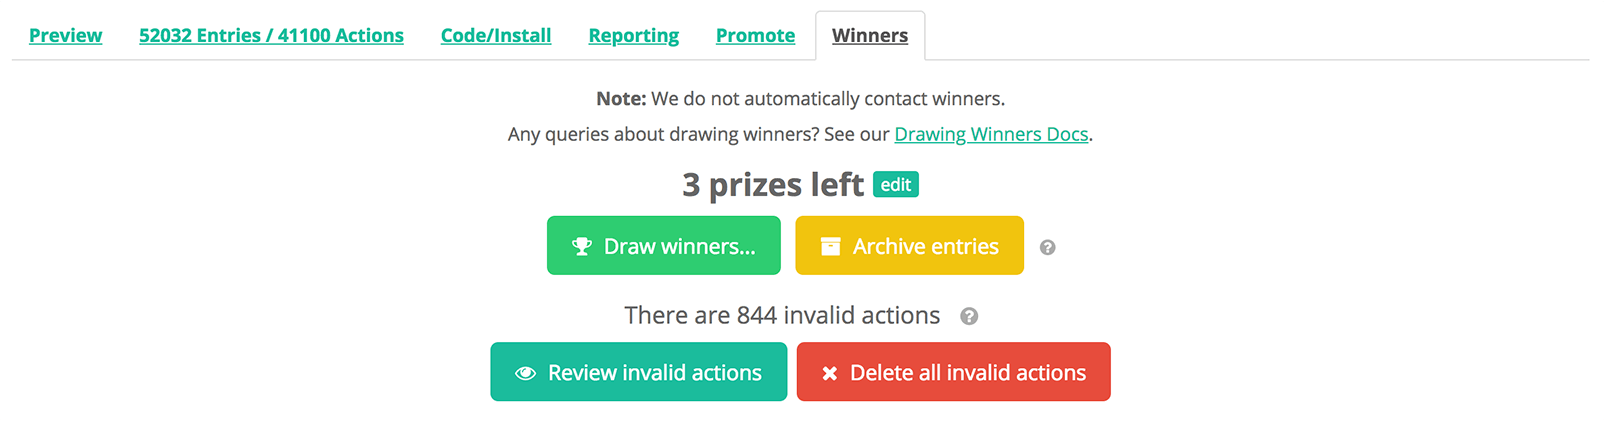 Winners tab on the Gleam Competitions dashboard